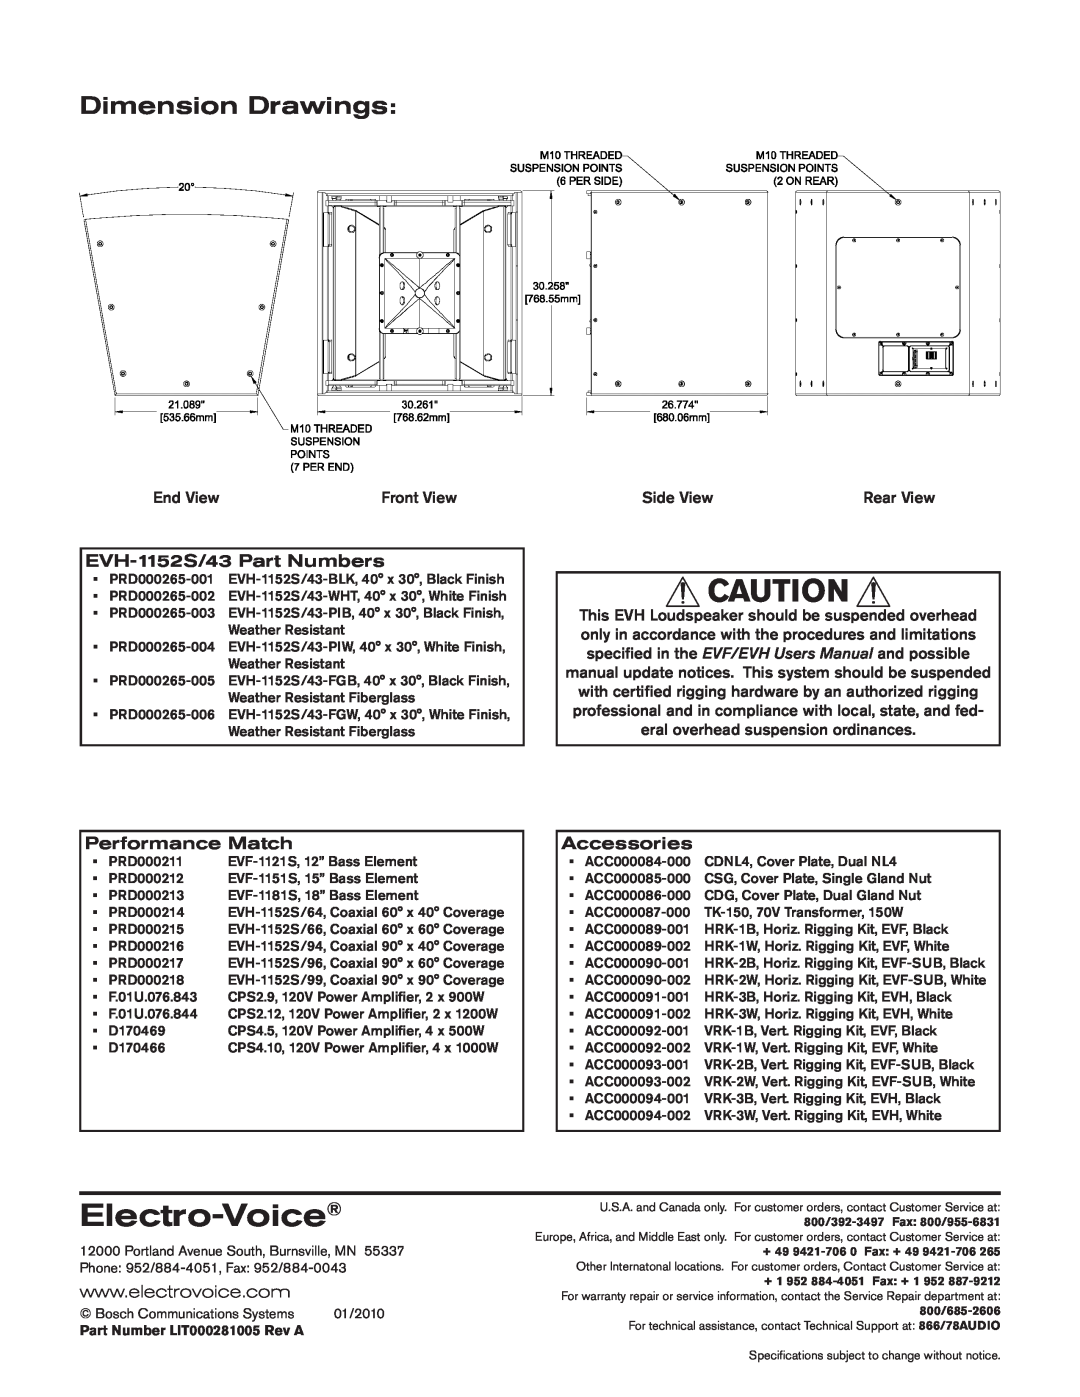 Electro-Voice Dimension Drawings, Electro-Voice, EVH-1152S/43Part Numbers, Performance Match, Accessories, End View 